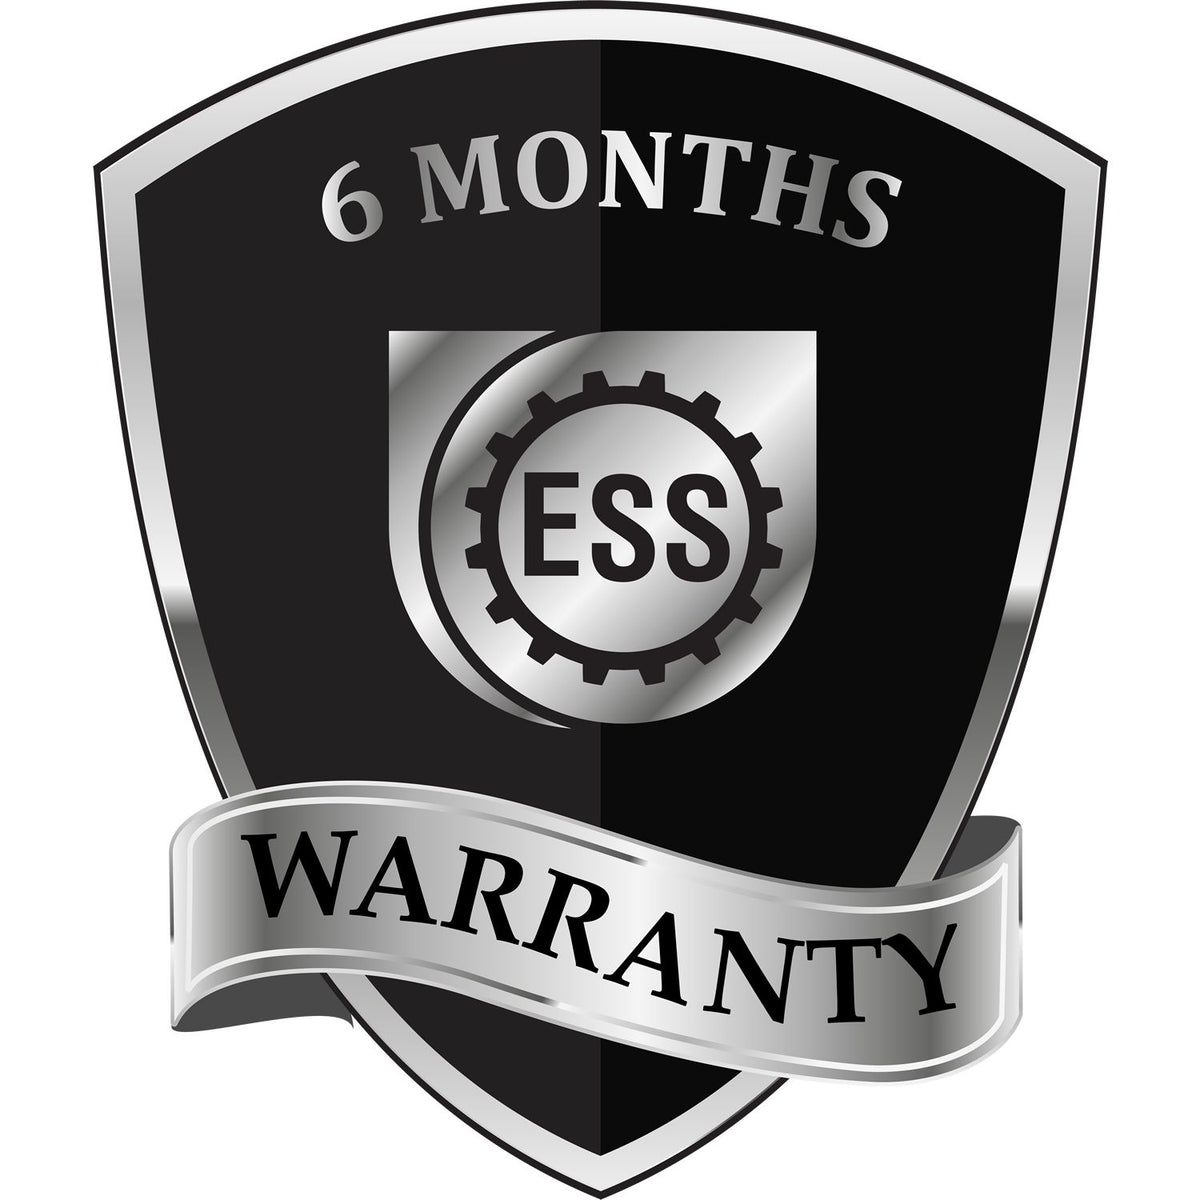 A badge or emblem showing a warranty icon for the PSI Massachusetts Notary Stamp